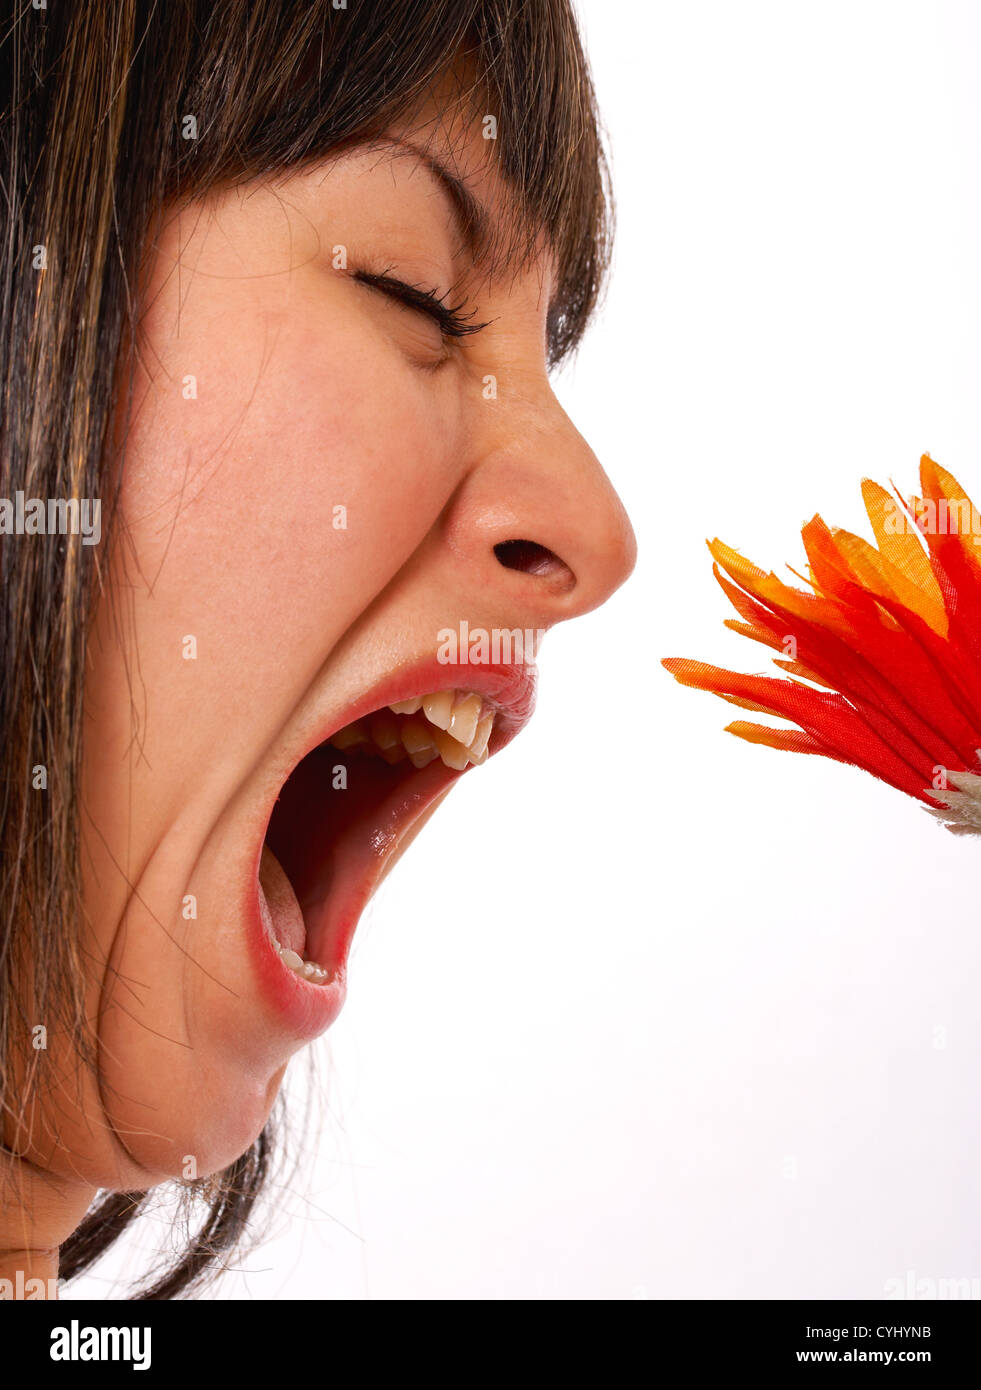 Woman With Hay Fever Allergy From Flowers Stock Photo